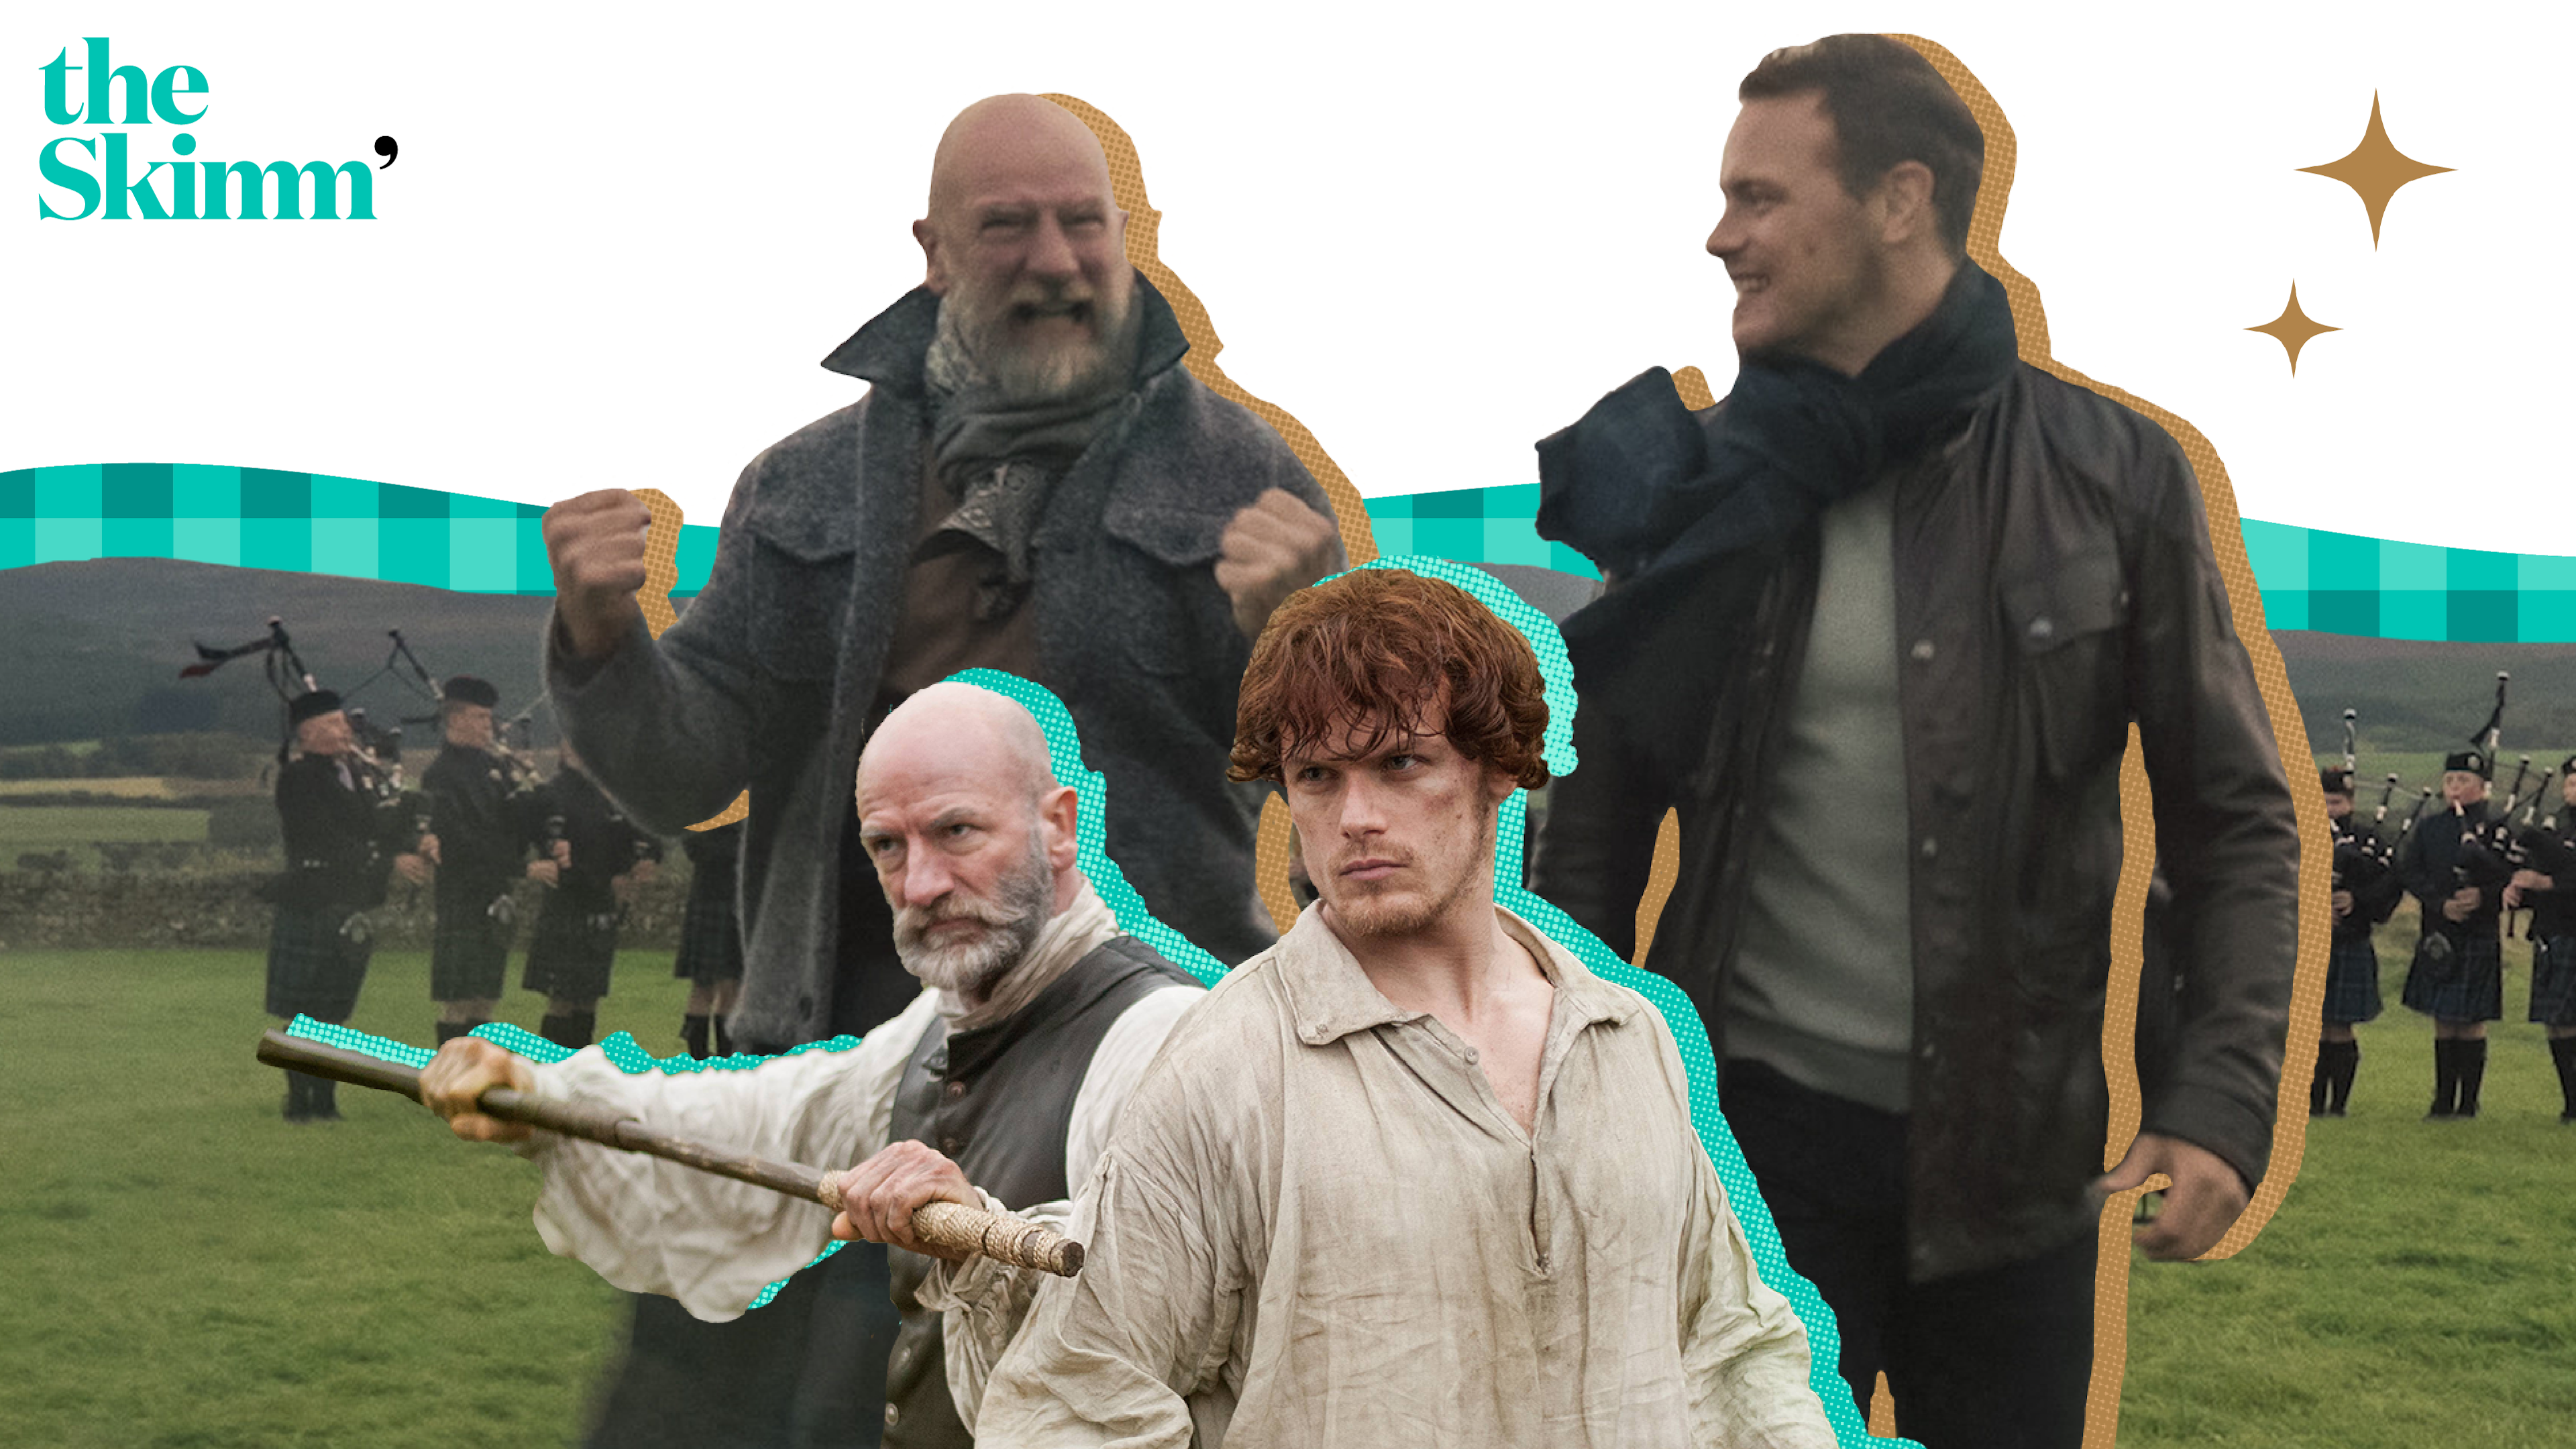 Treated photo of "Men in Kilts" hosts and "Outlander" characters in Scotland 